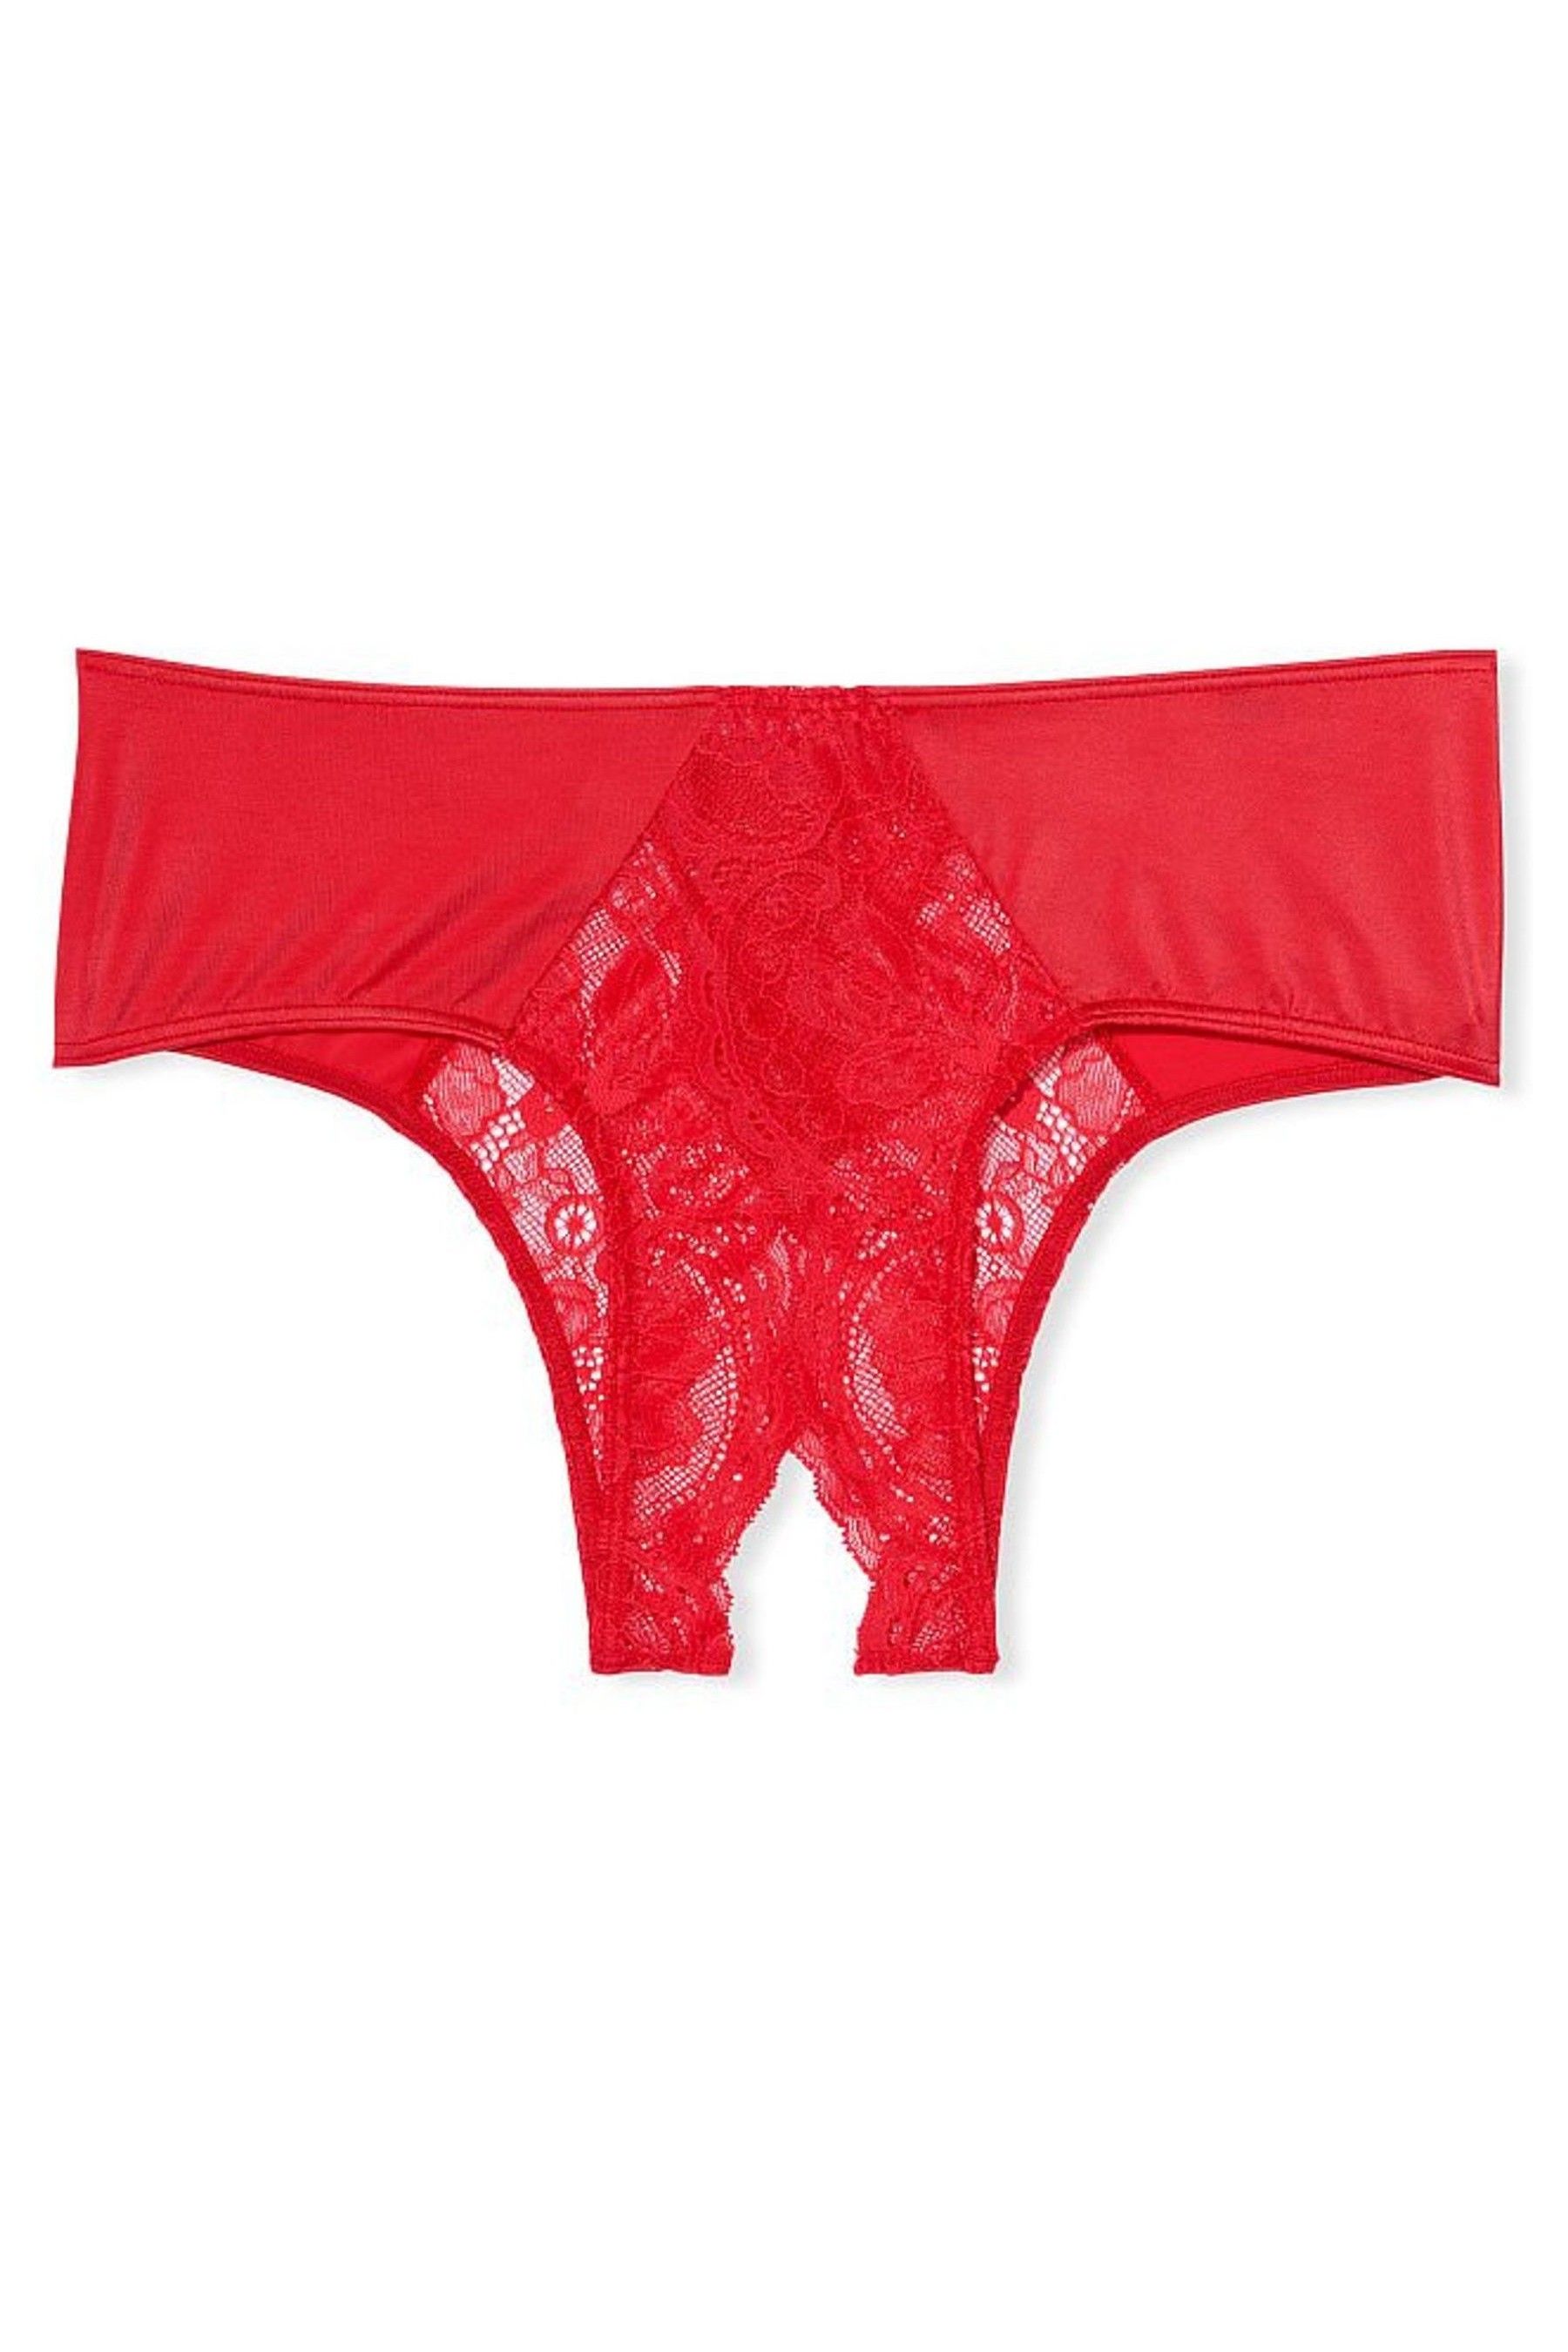 Buy Victoria S Secret Lace Ouvert Cheeky Panty From The Victoria S